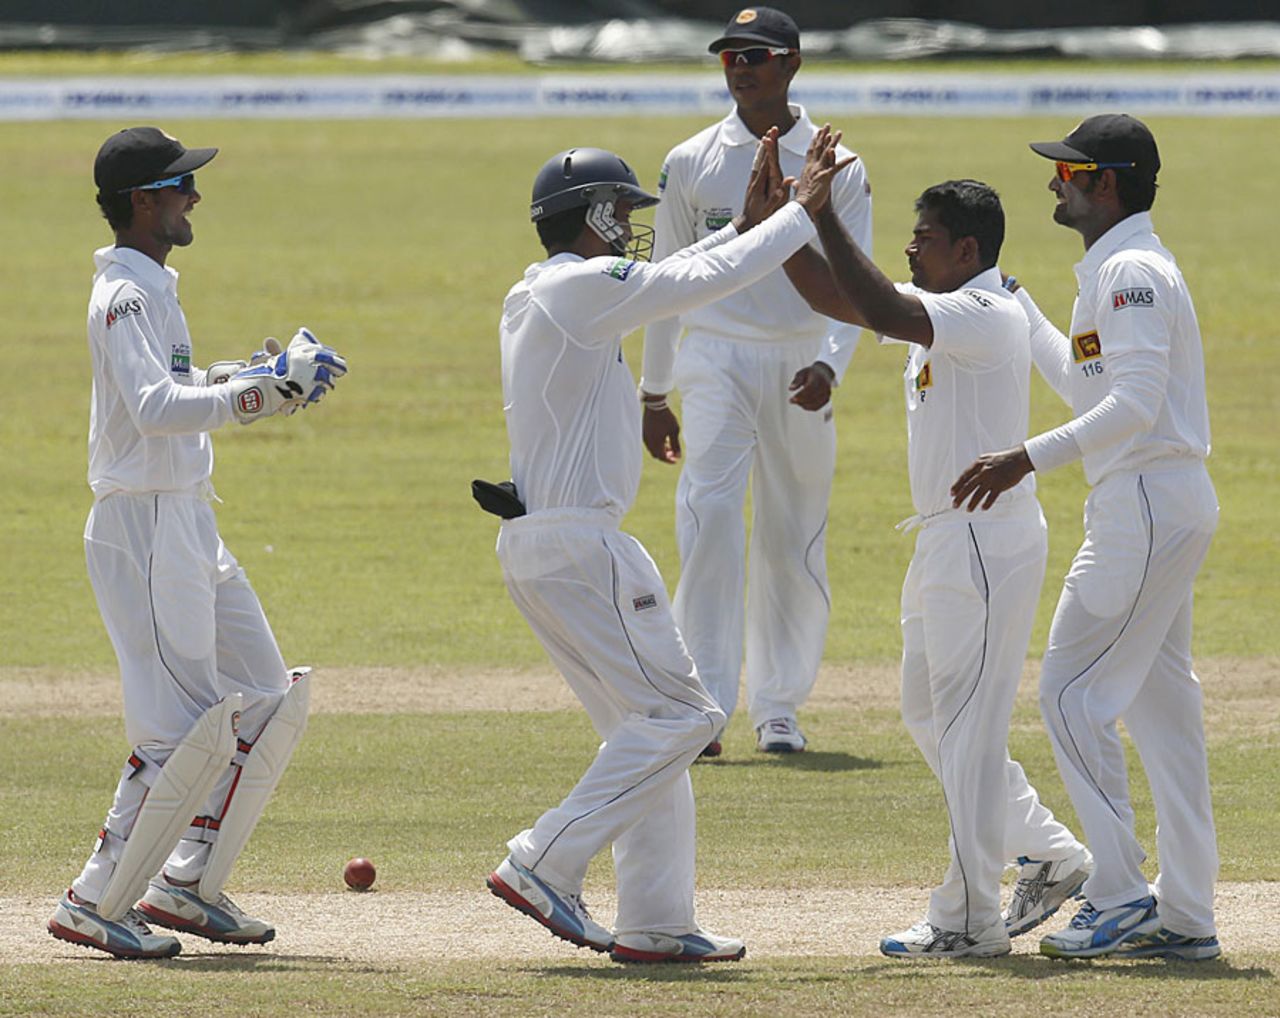 Rangana Herath got a wicket in the morning session, Sri Lanka v Bangladesh, 1st Test, Galle, 3rd day, March 10, 2013